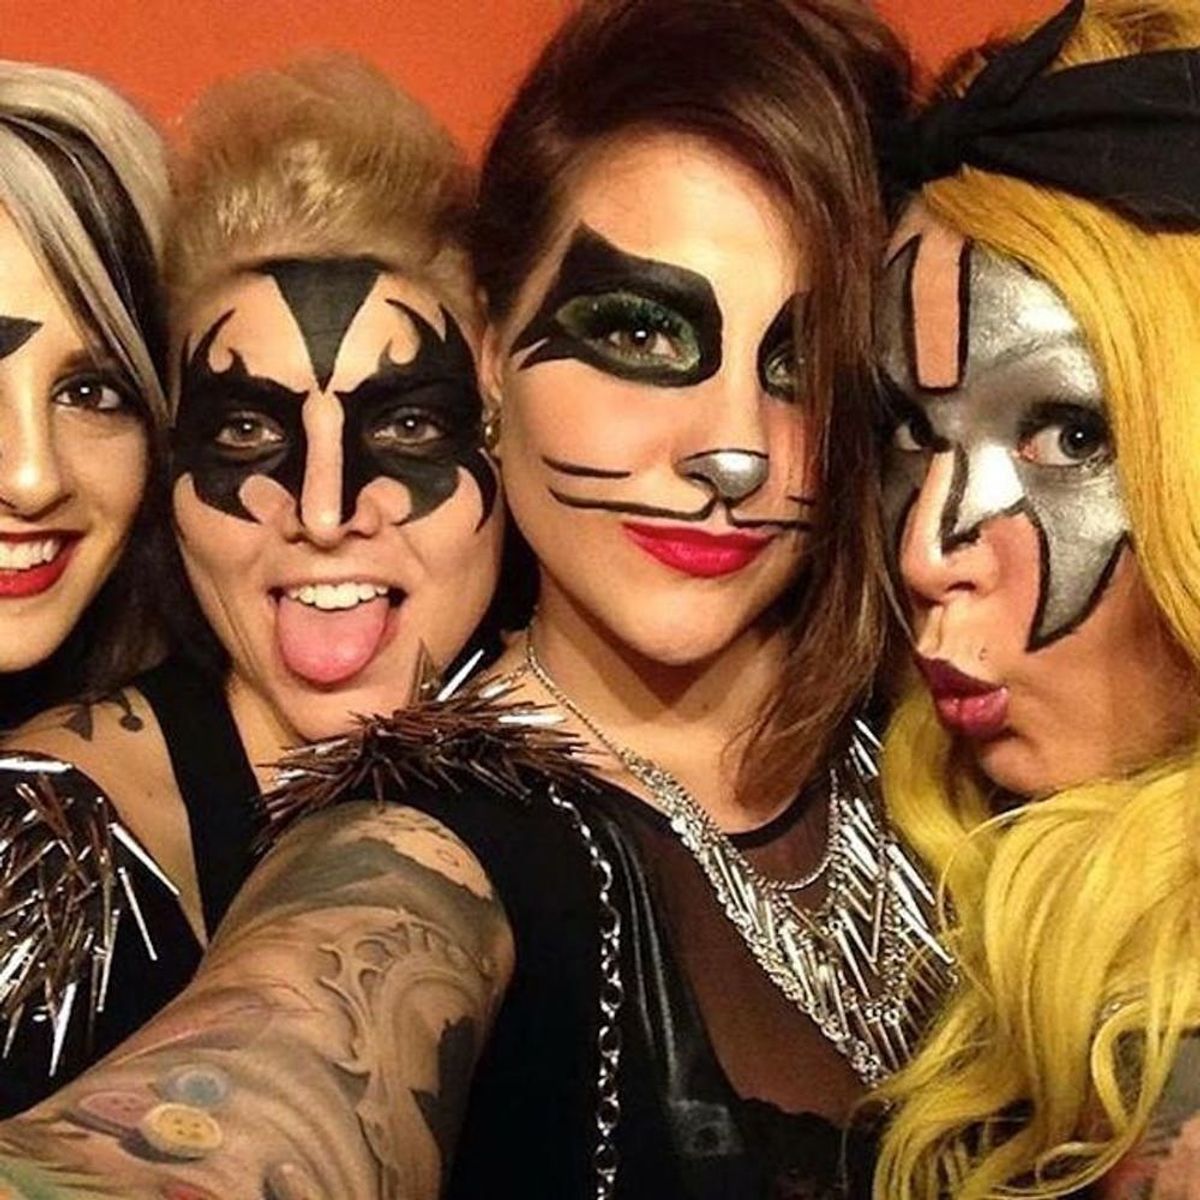 100 Awesome Group Halloween Costume Ideas for 2015